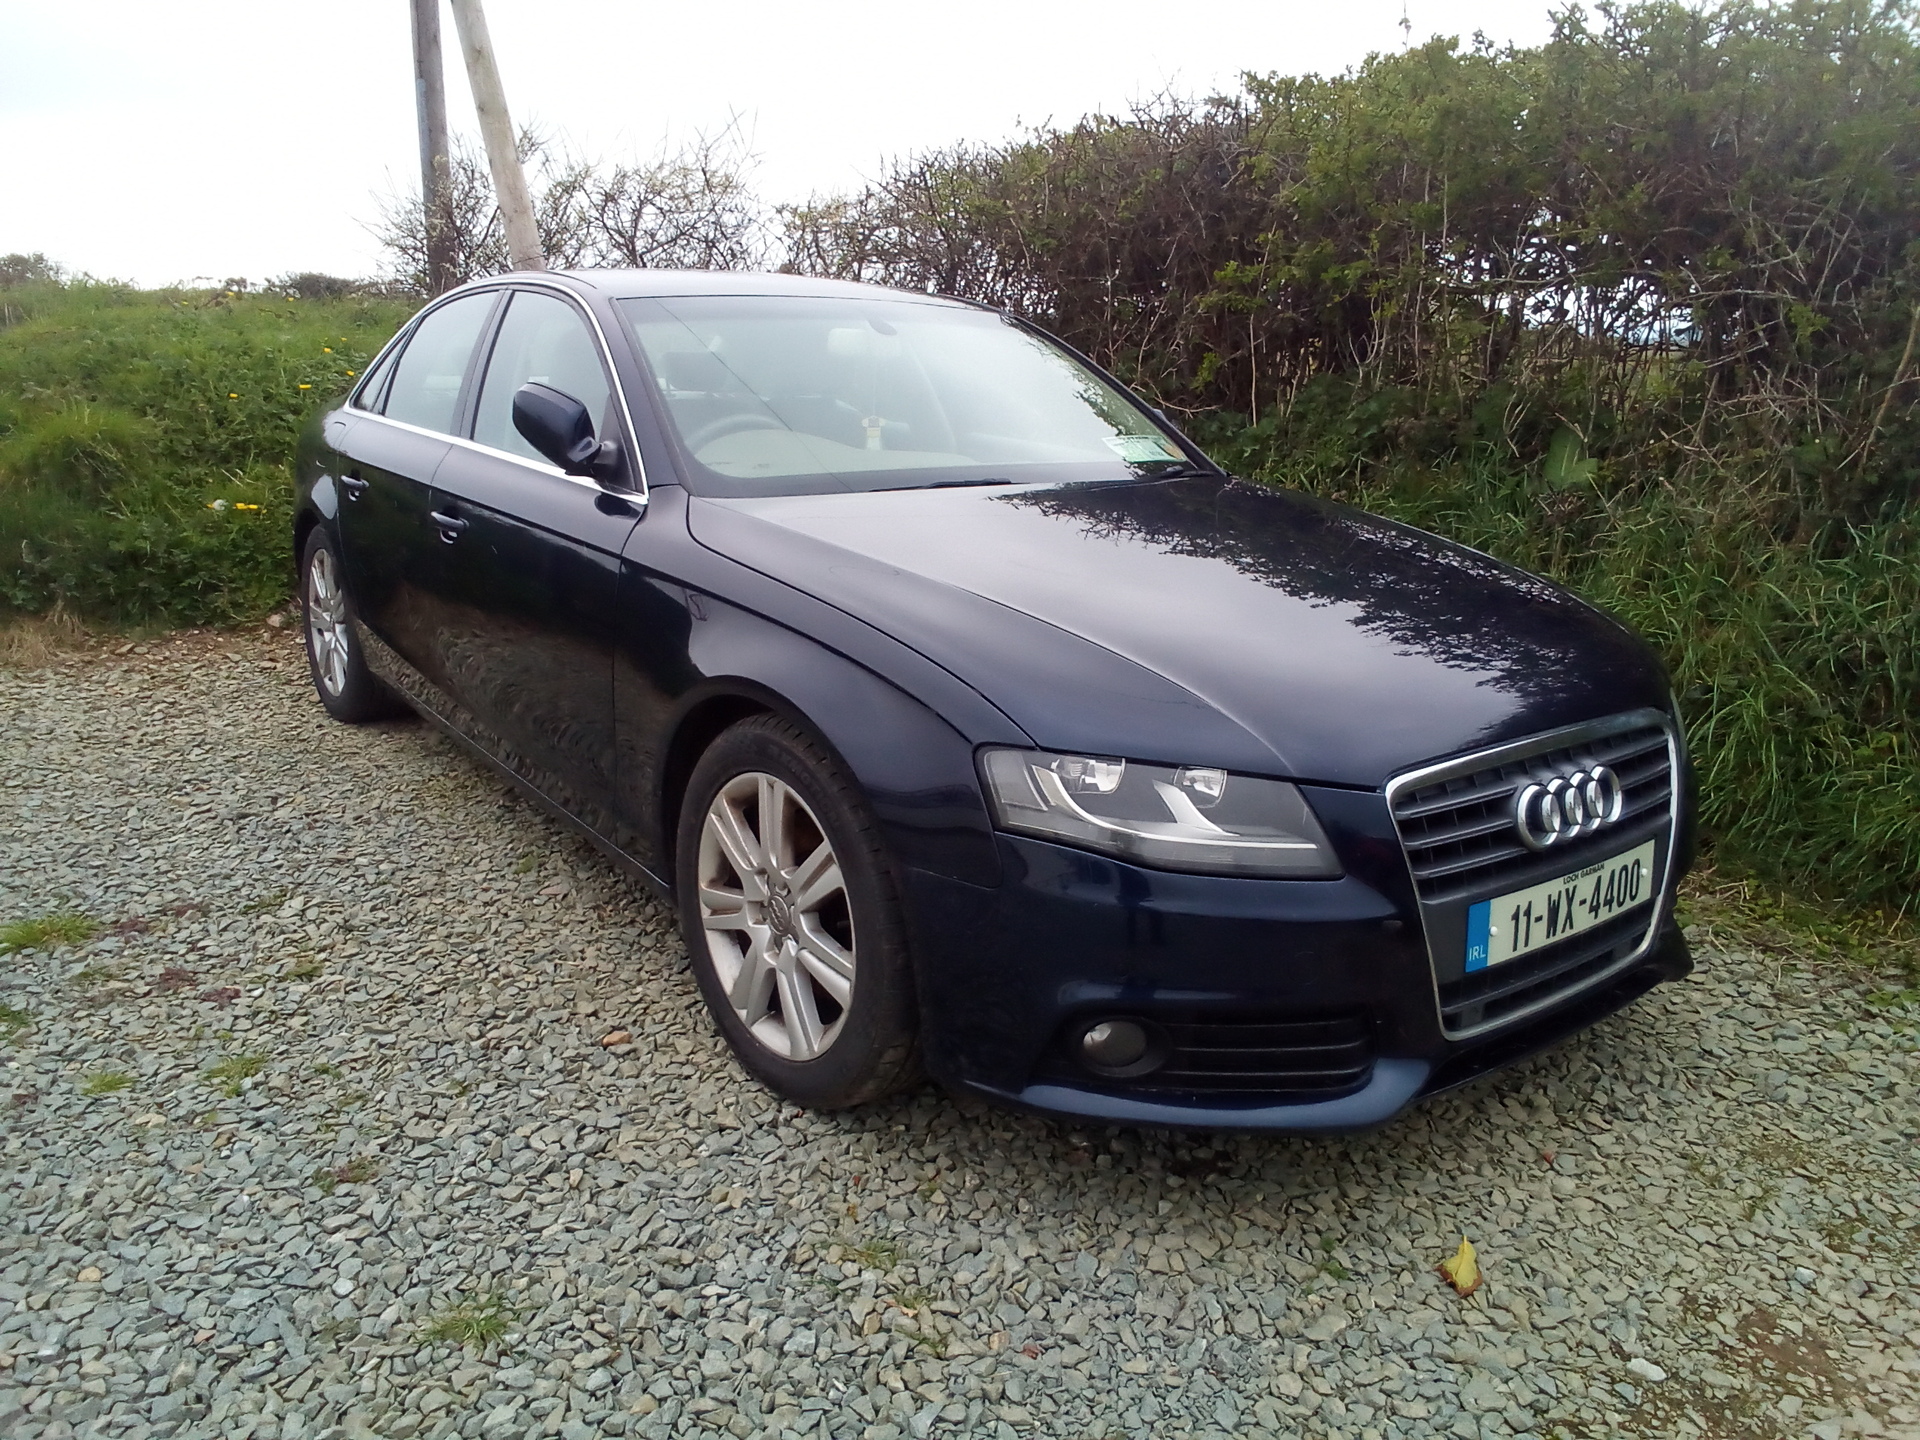 Used Audi A4 2011 in Wexford